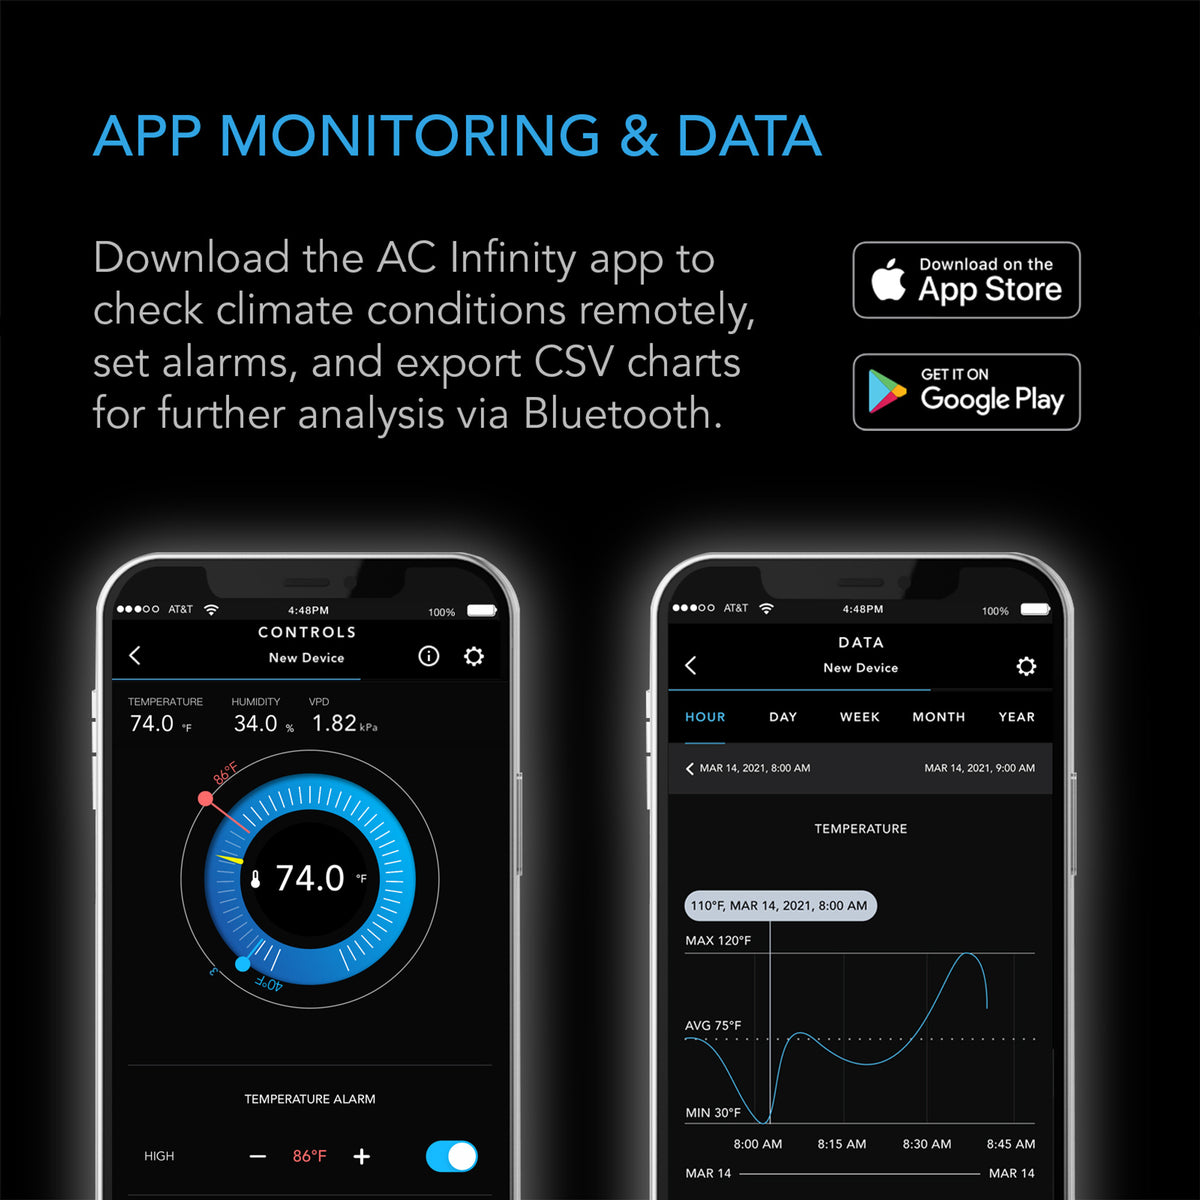 Download the AC Infinity app for full monitoring and data